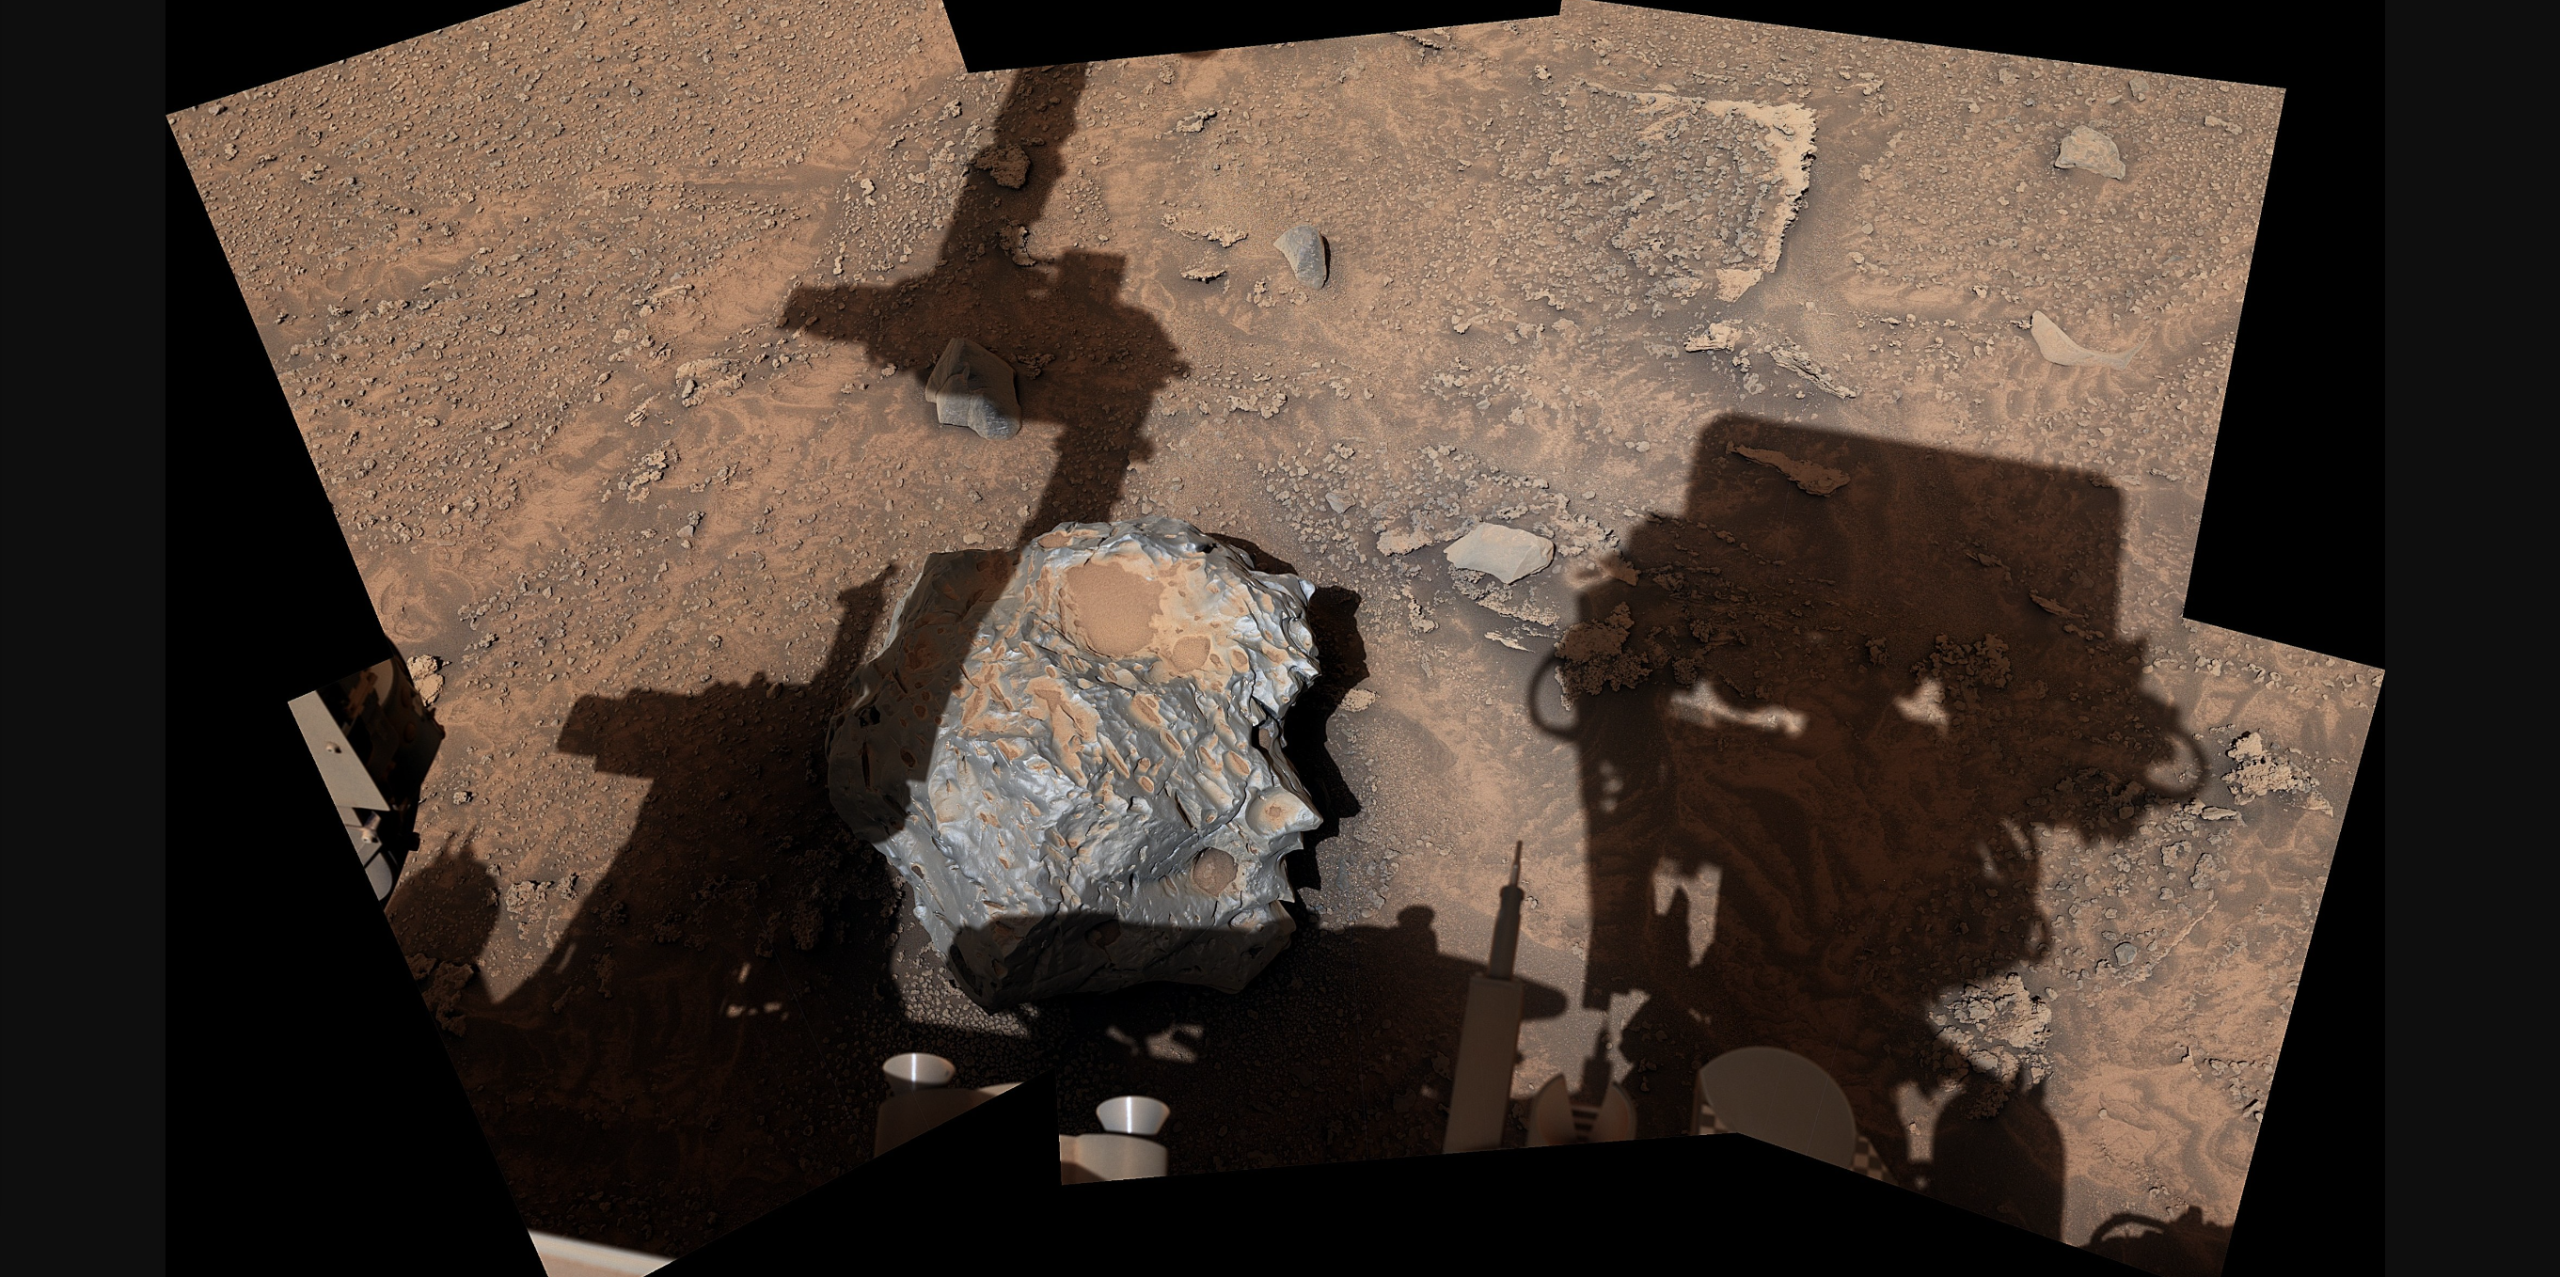 A photograph of the meteorite on Mars spotted by the Curiosity rover. Image Credit: NASA / Curiosity.